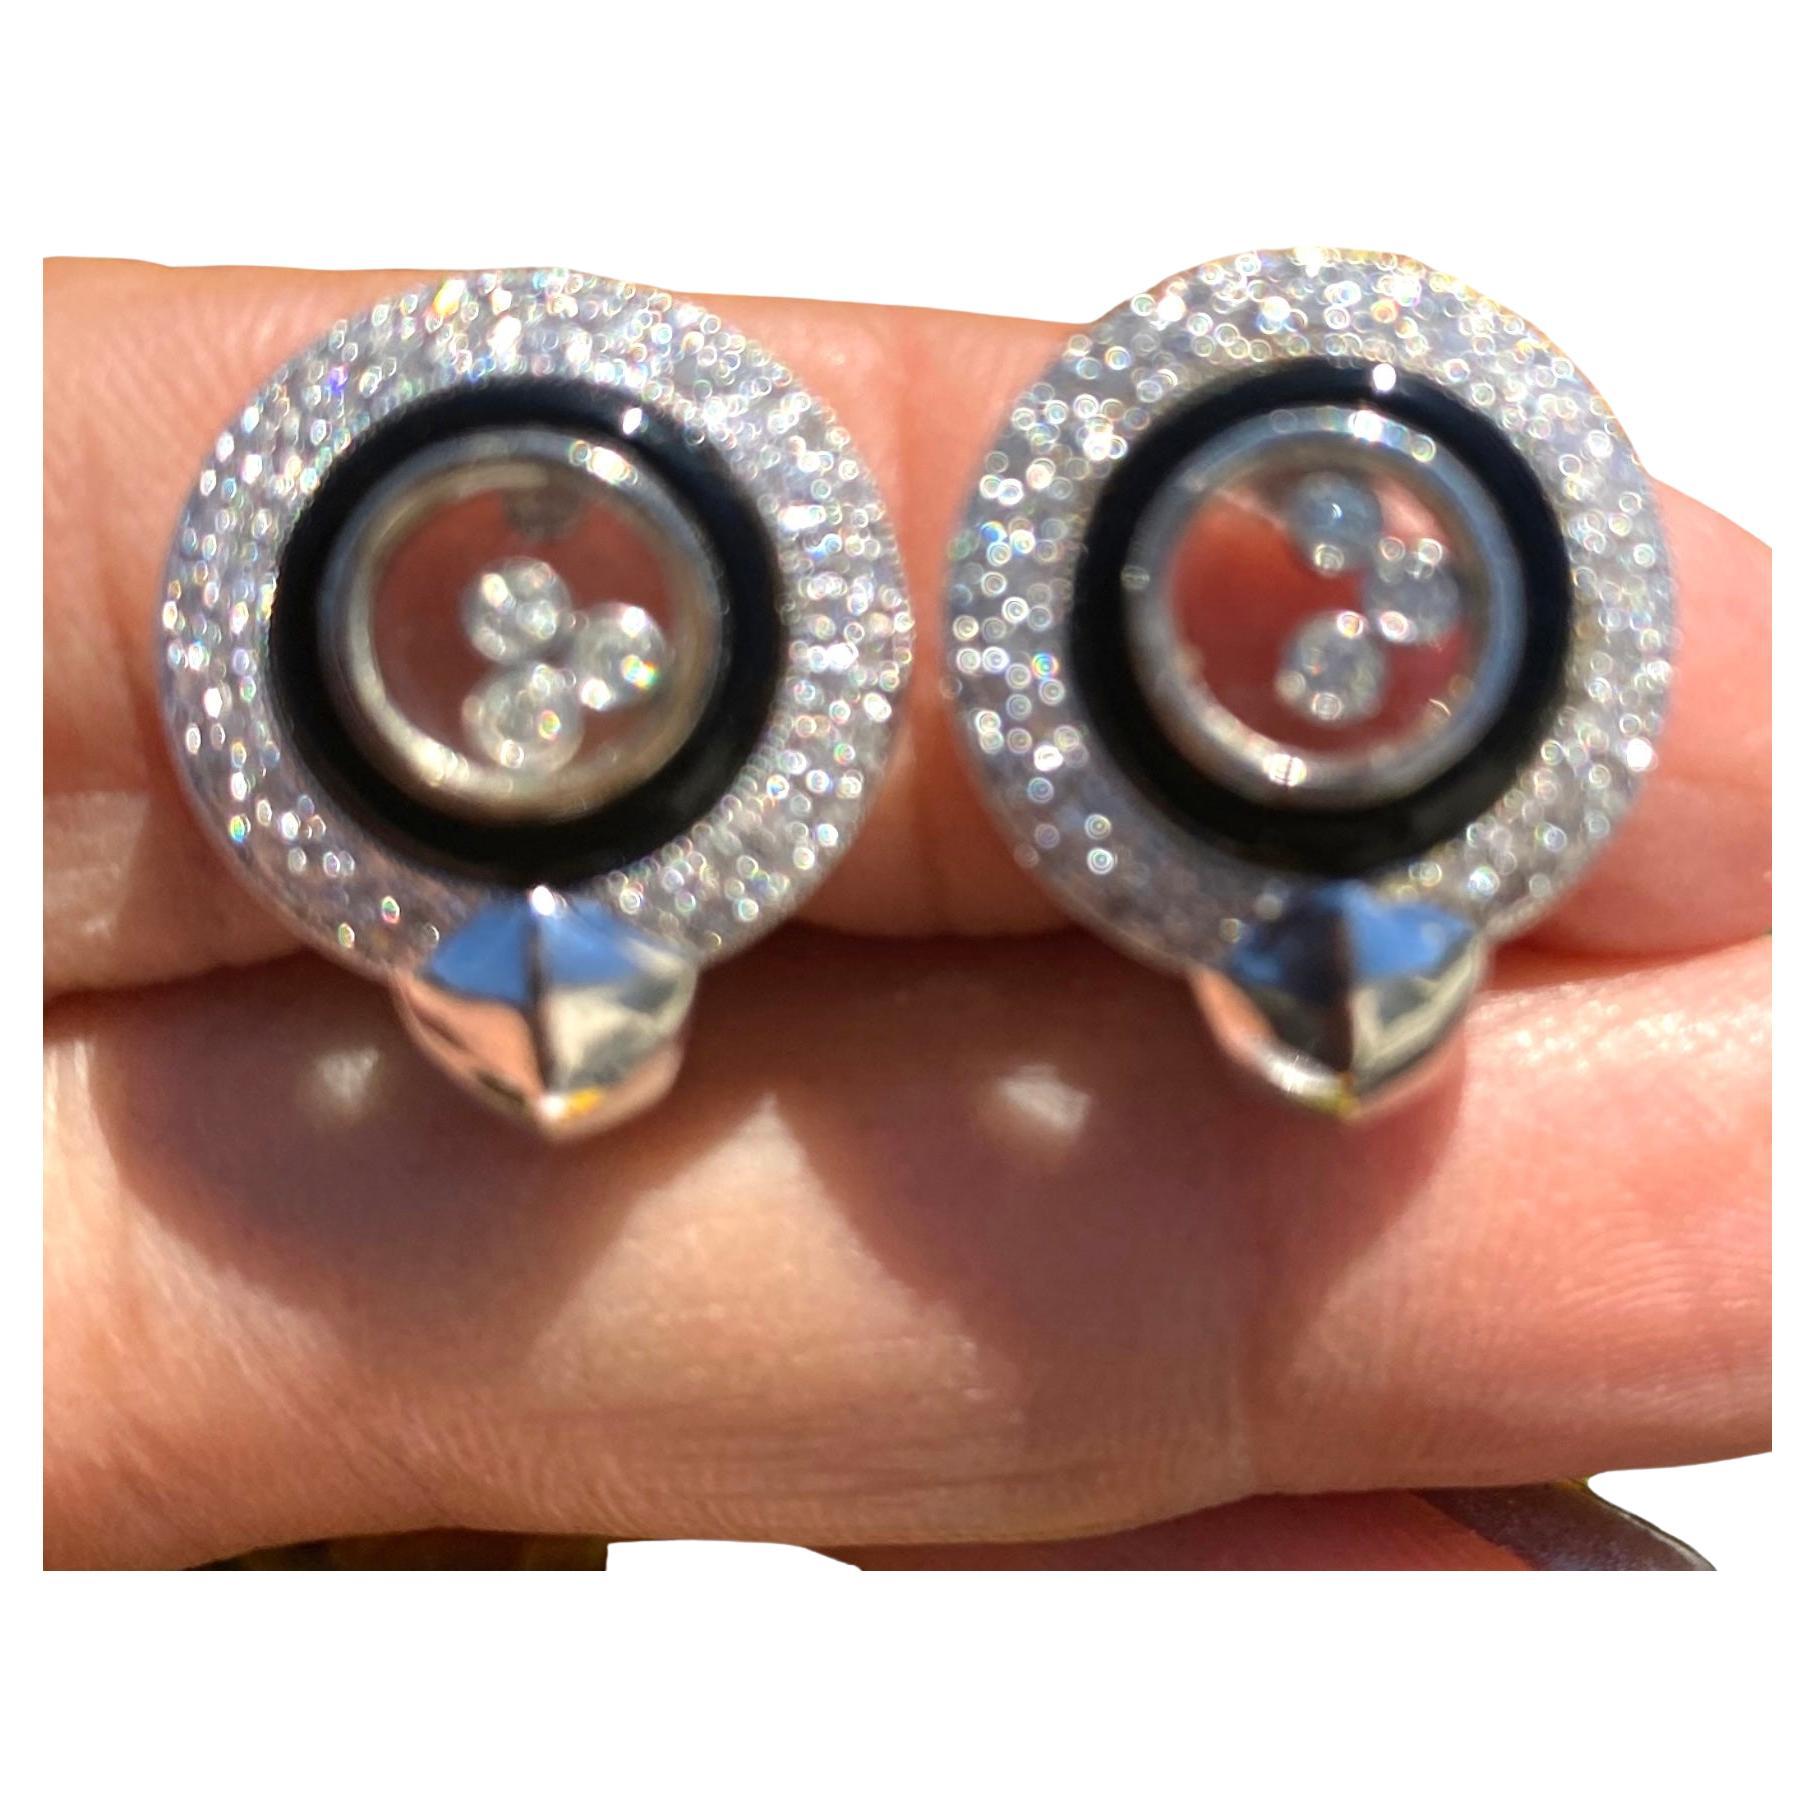 Art Deco Floating Diamond and Black Onyx Earrings 14 Karat White Gold
18 mm diamond earrings are well made with omega backings. 
Quality and durable having a total weight of .80 carats.

Six floating diamonds are set in glass which is a bezel set.